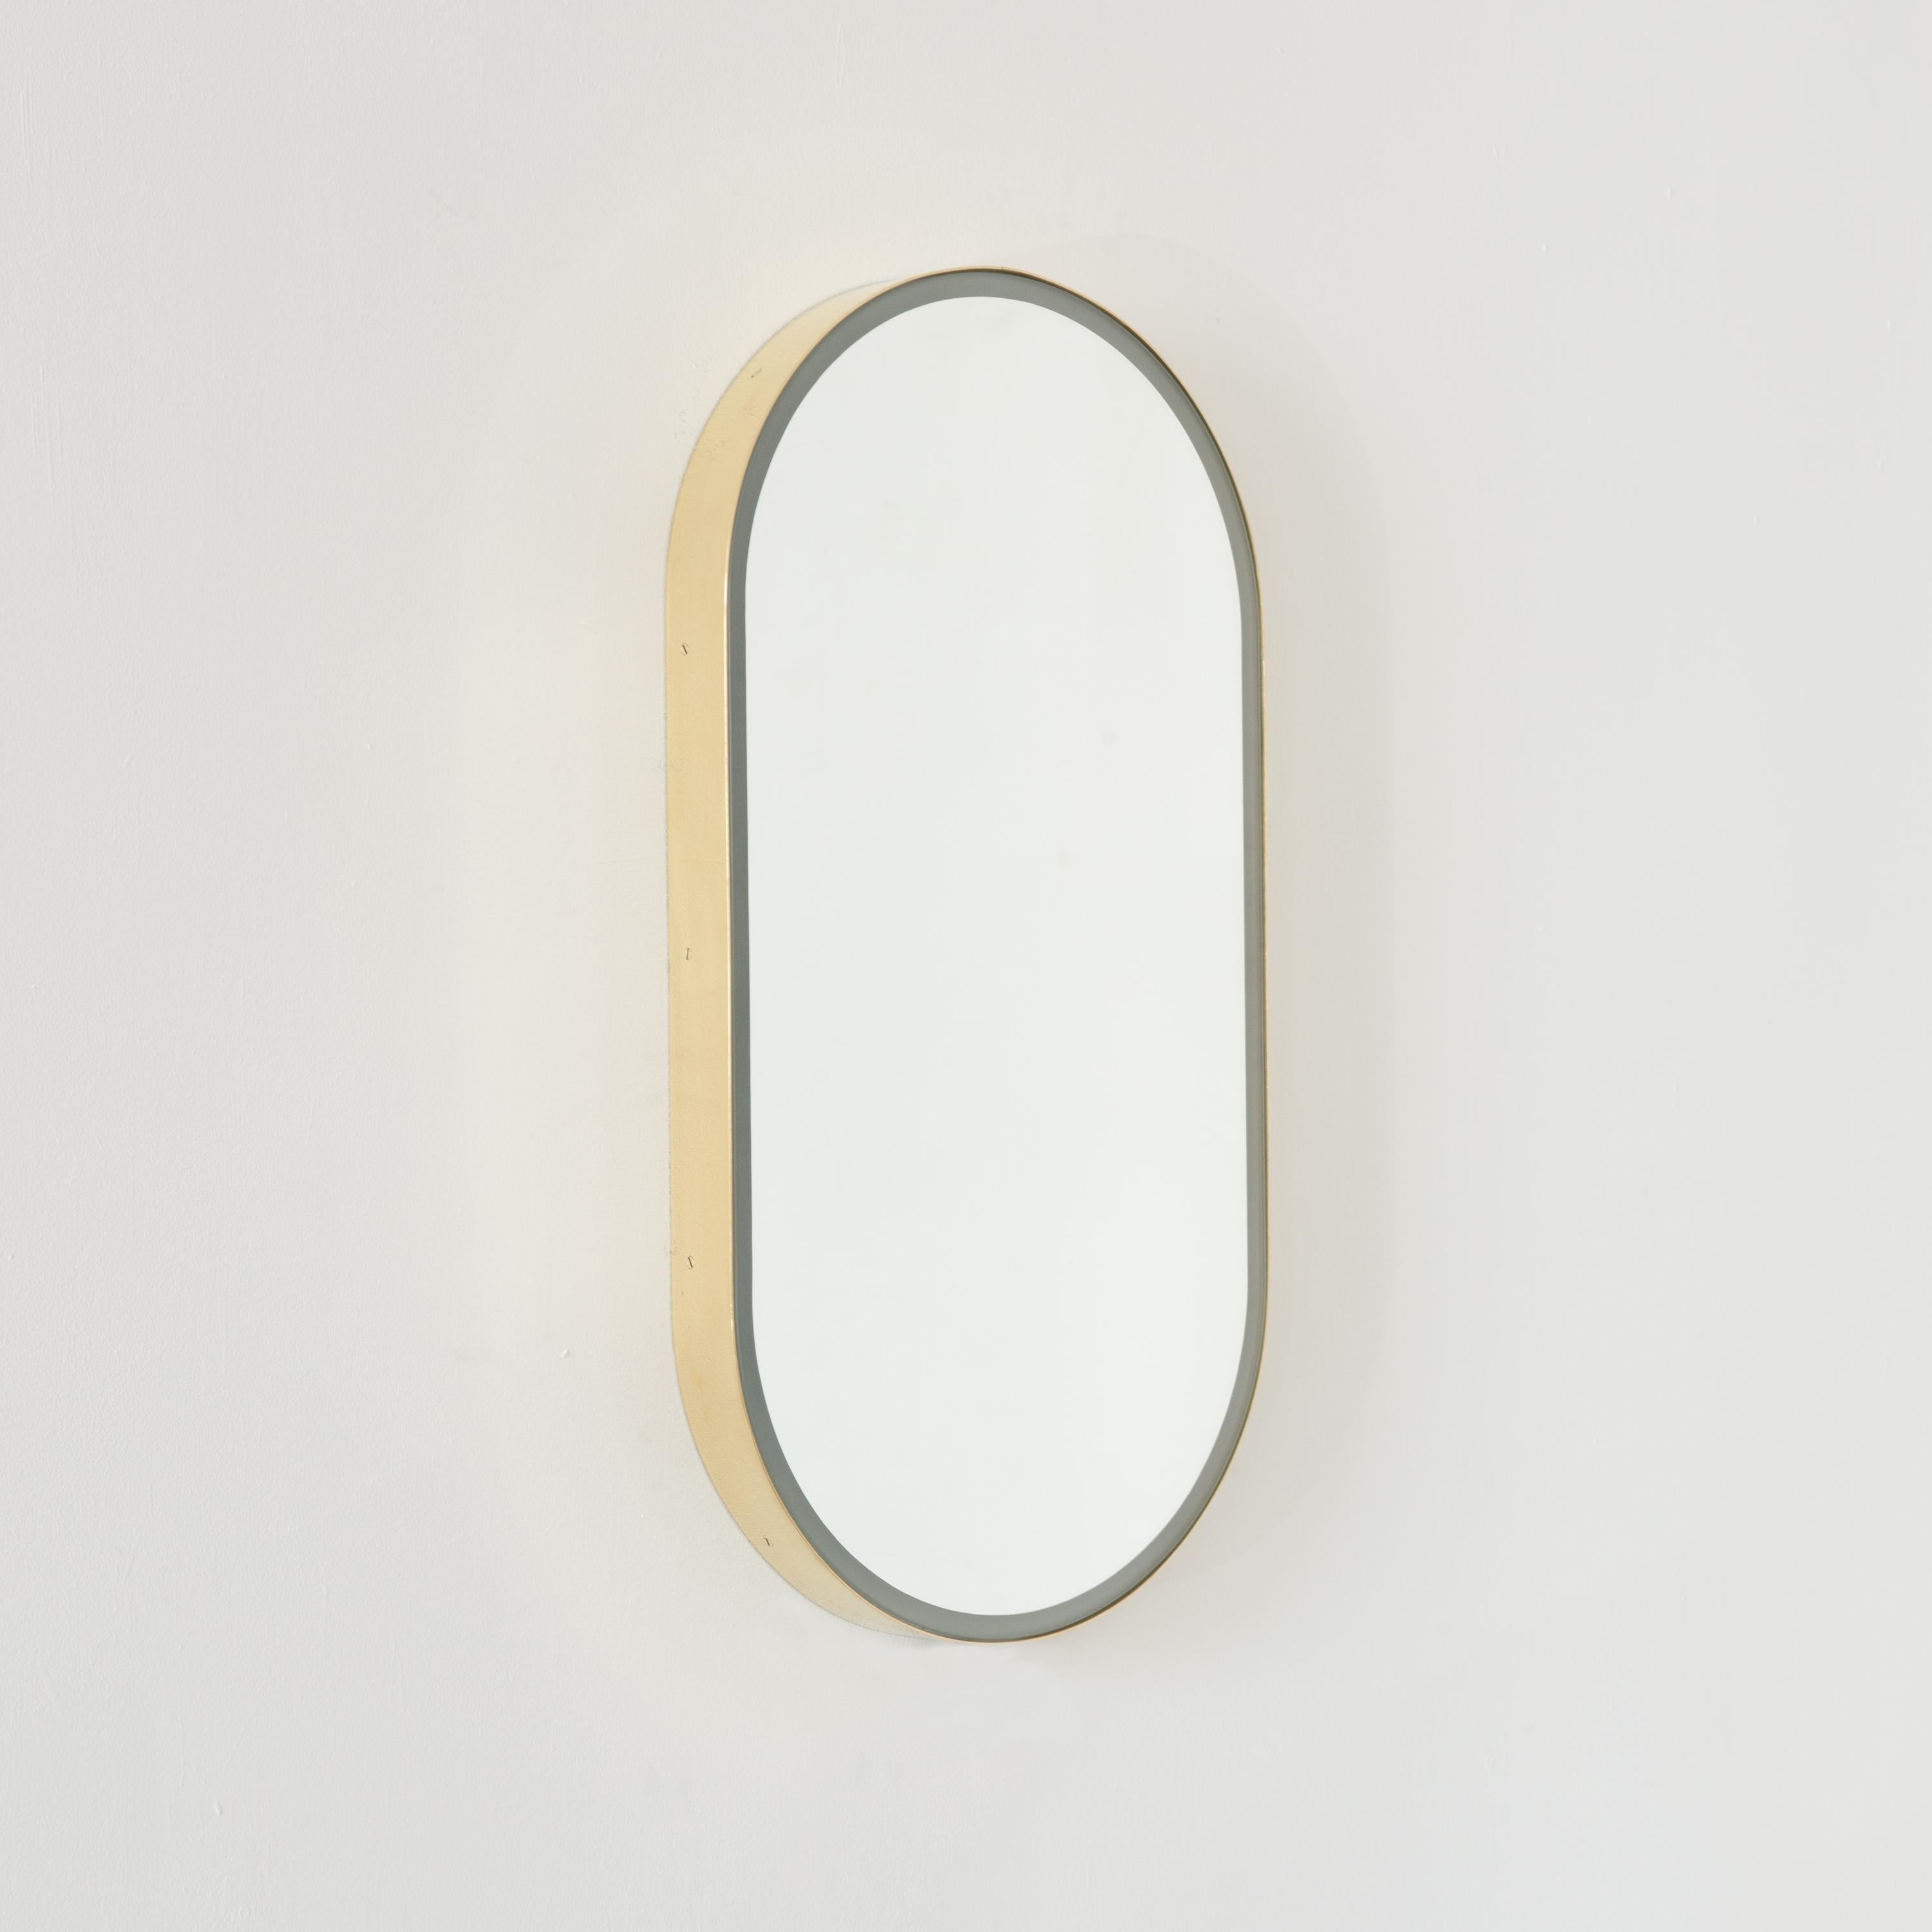 Capsula Illuminated Capsule Shape Modern Mirror with Brass Frame, Medium In New Condition For Sale In London, GB